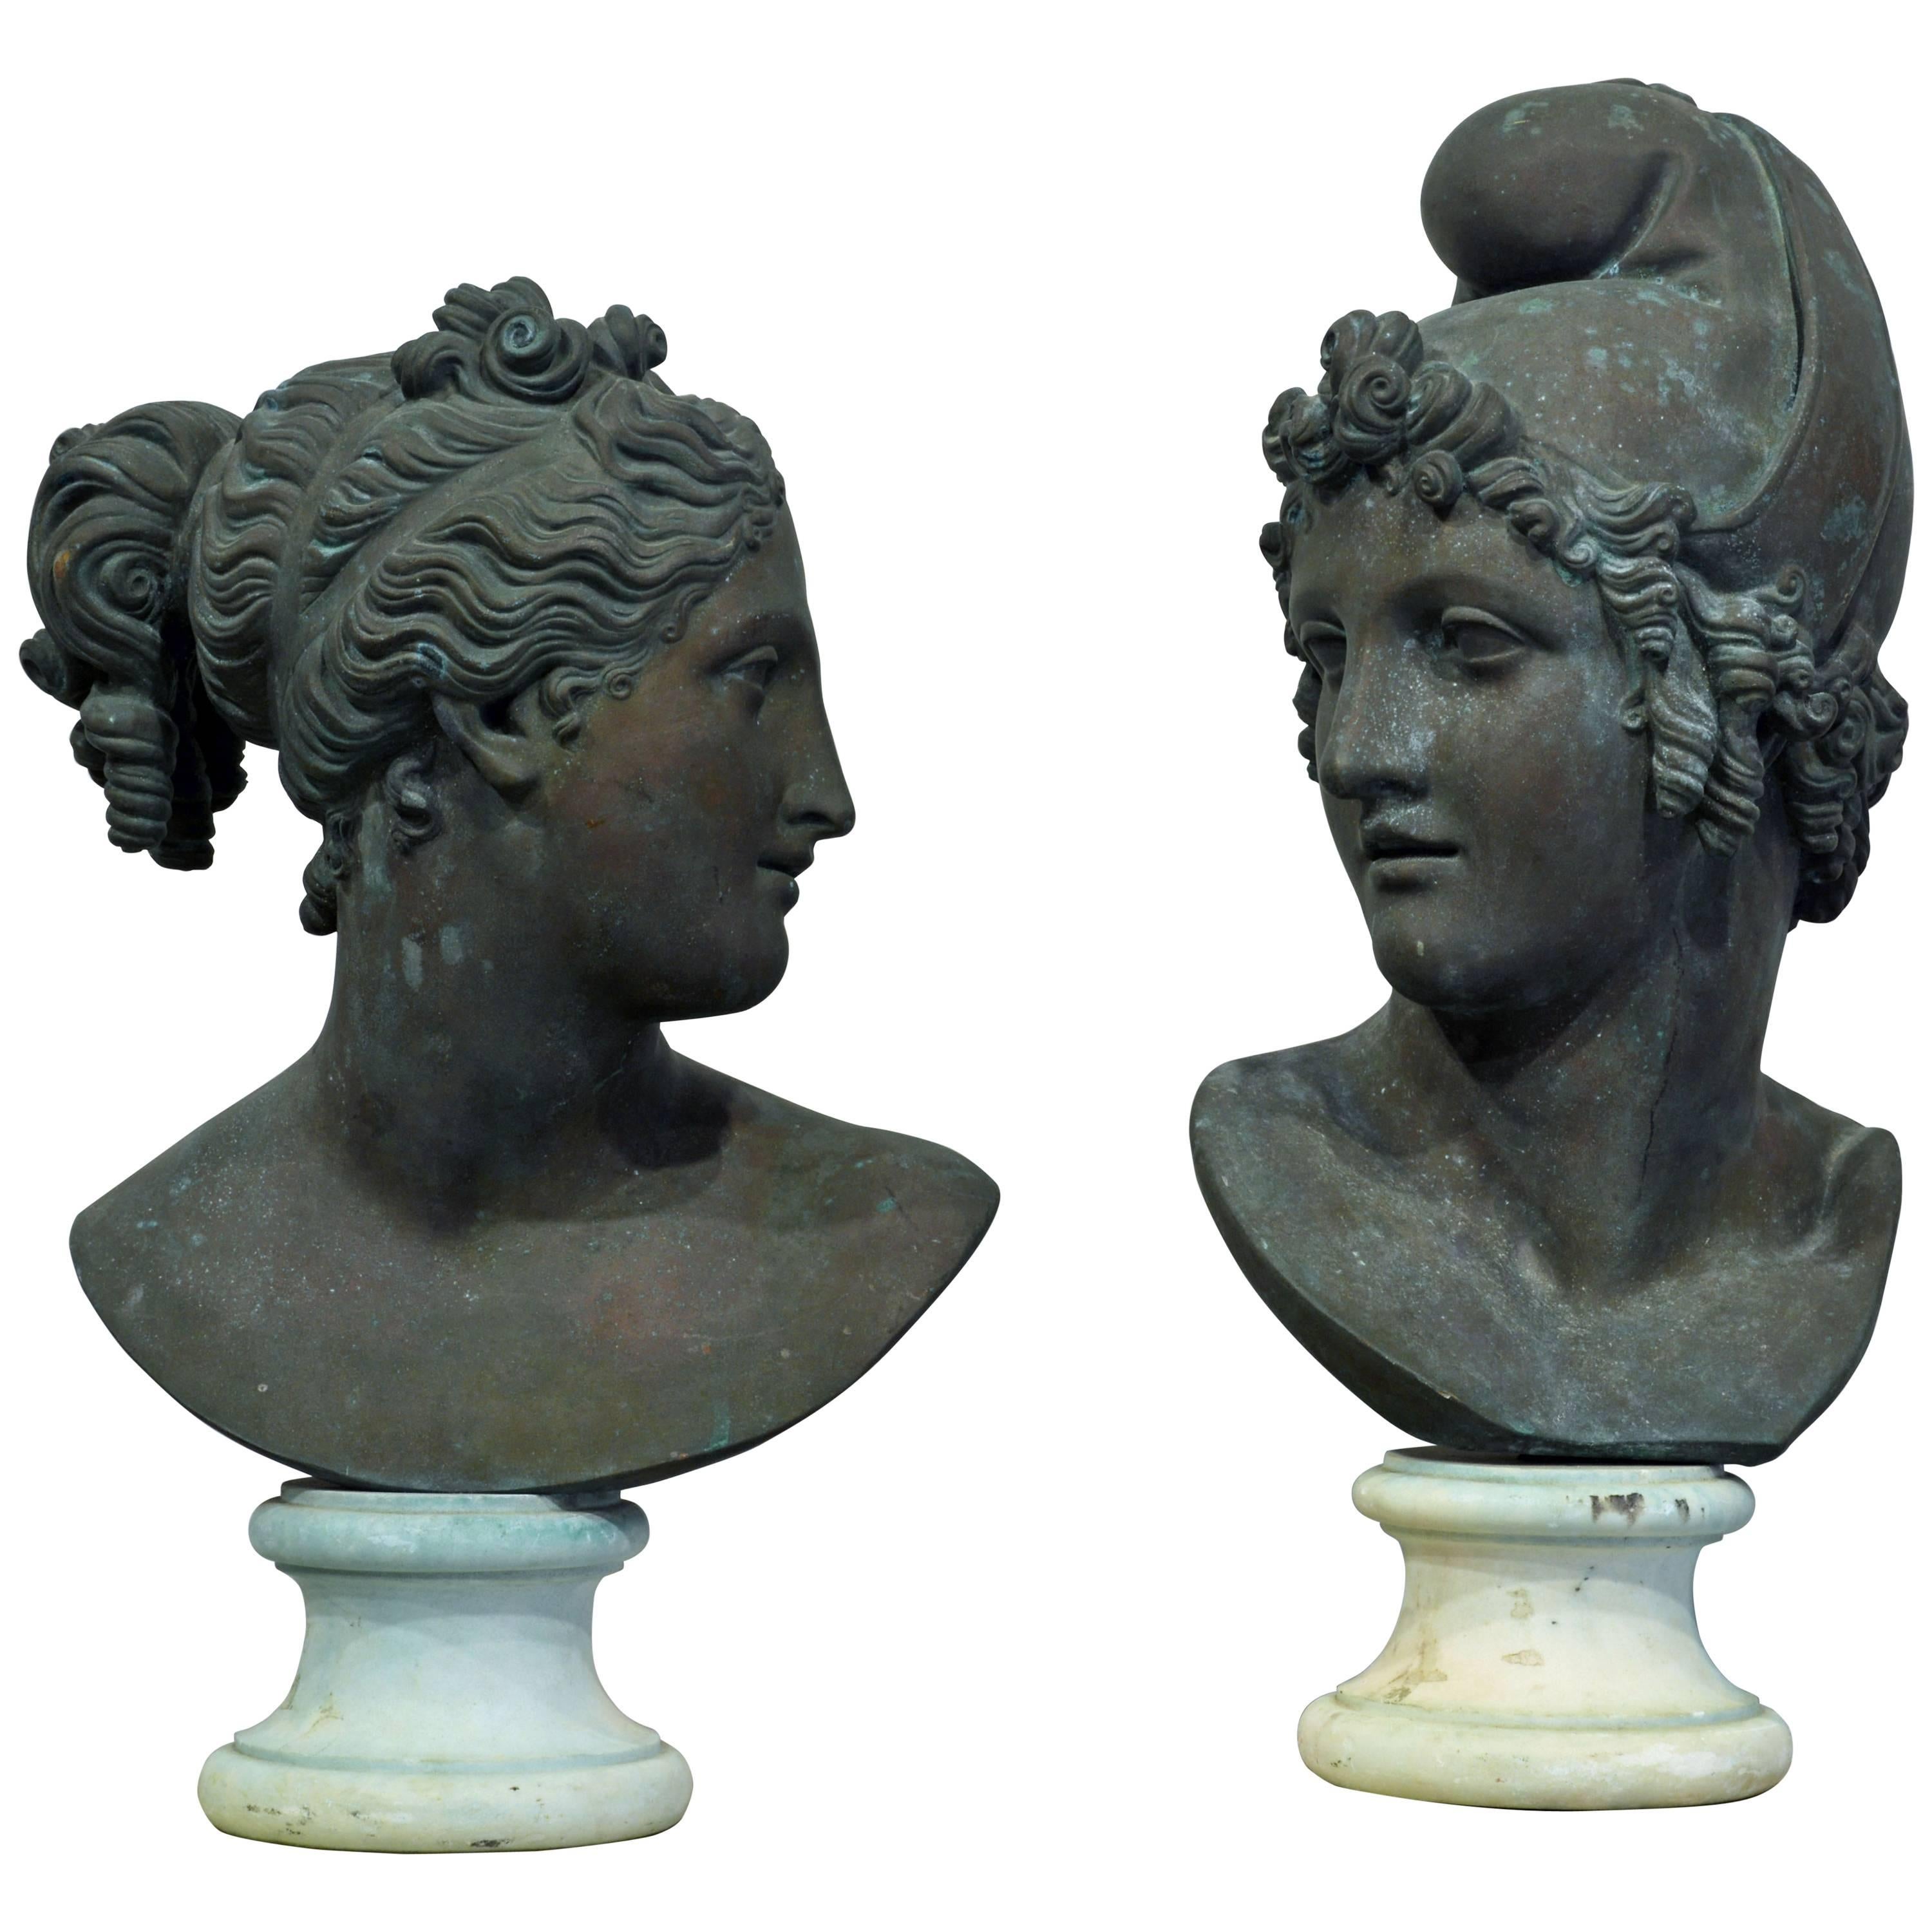 Pair of 19th Century Italian Neoclassical Bronze Busts of Ganymede and Hebe